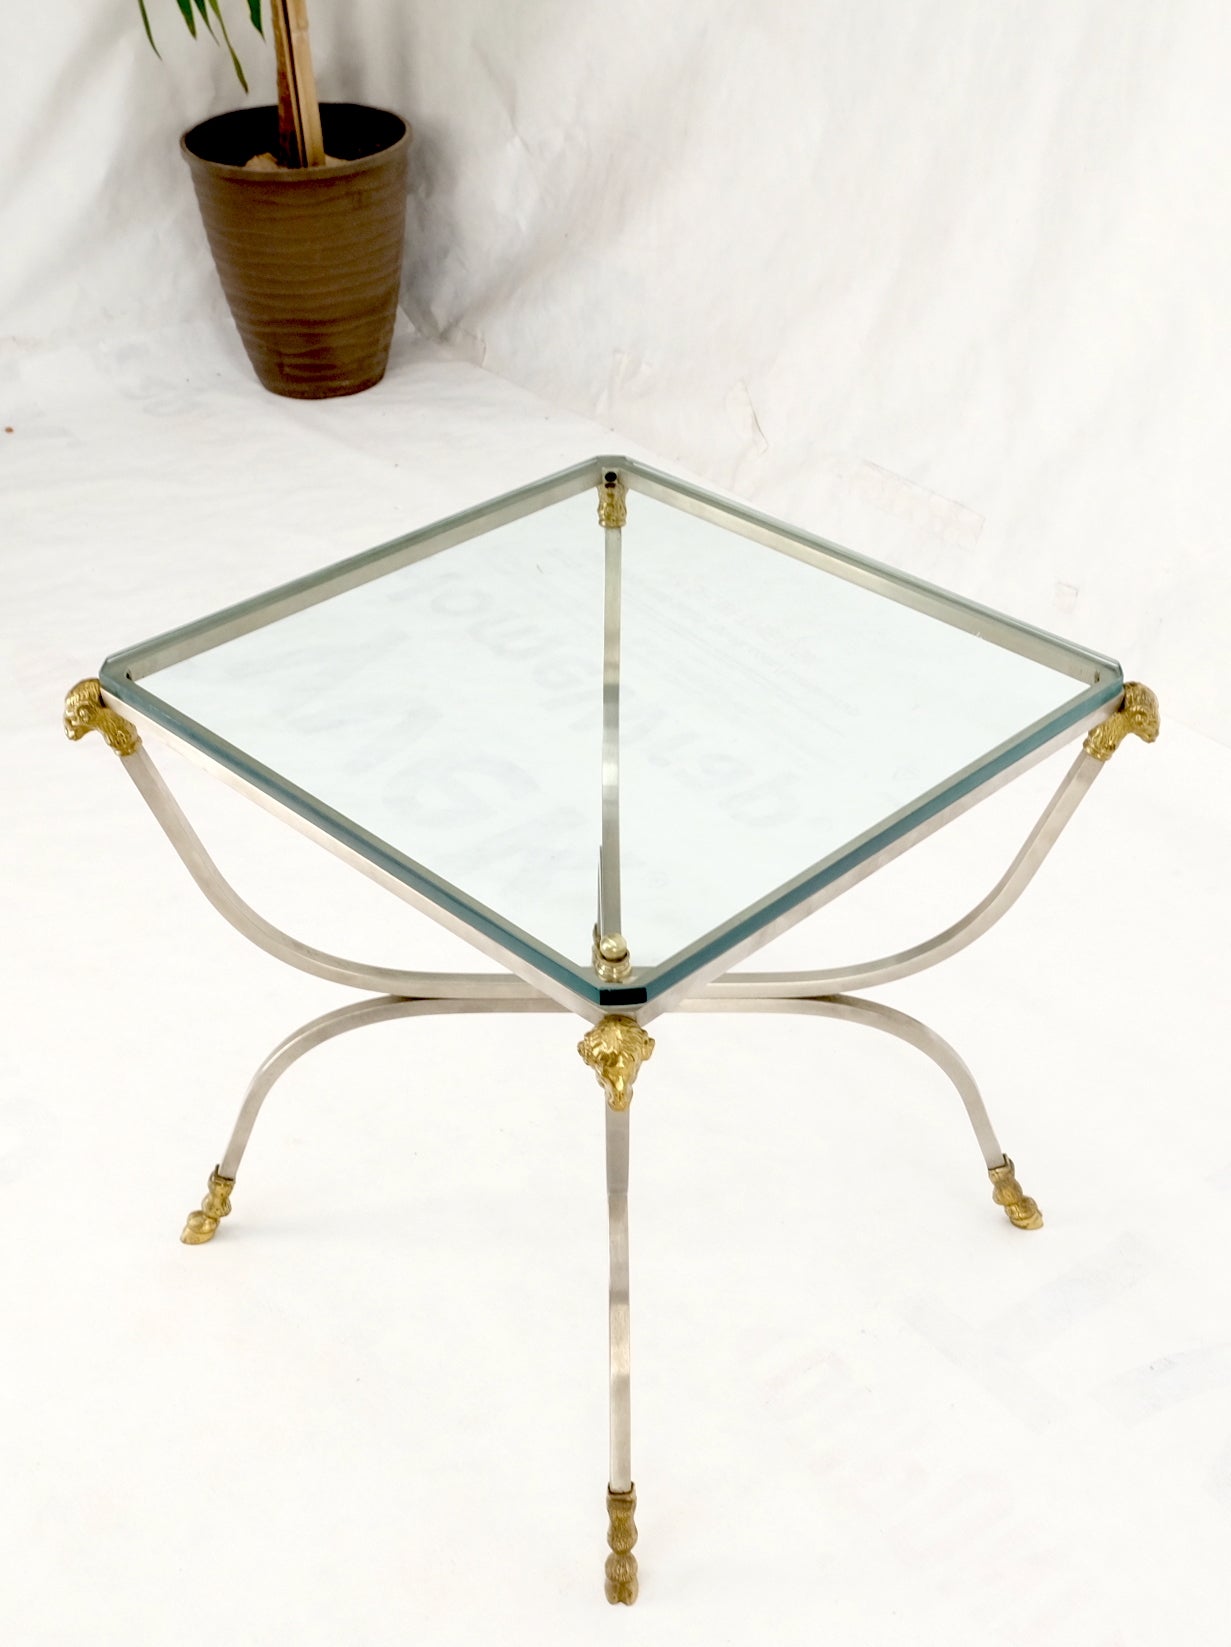 Chrome brass ram heads hoof feet square side end stand table made in Italy mint!
Glass measures .5'' in thickness.